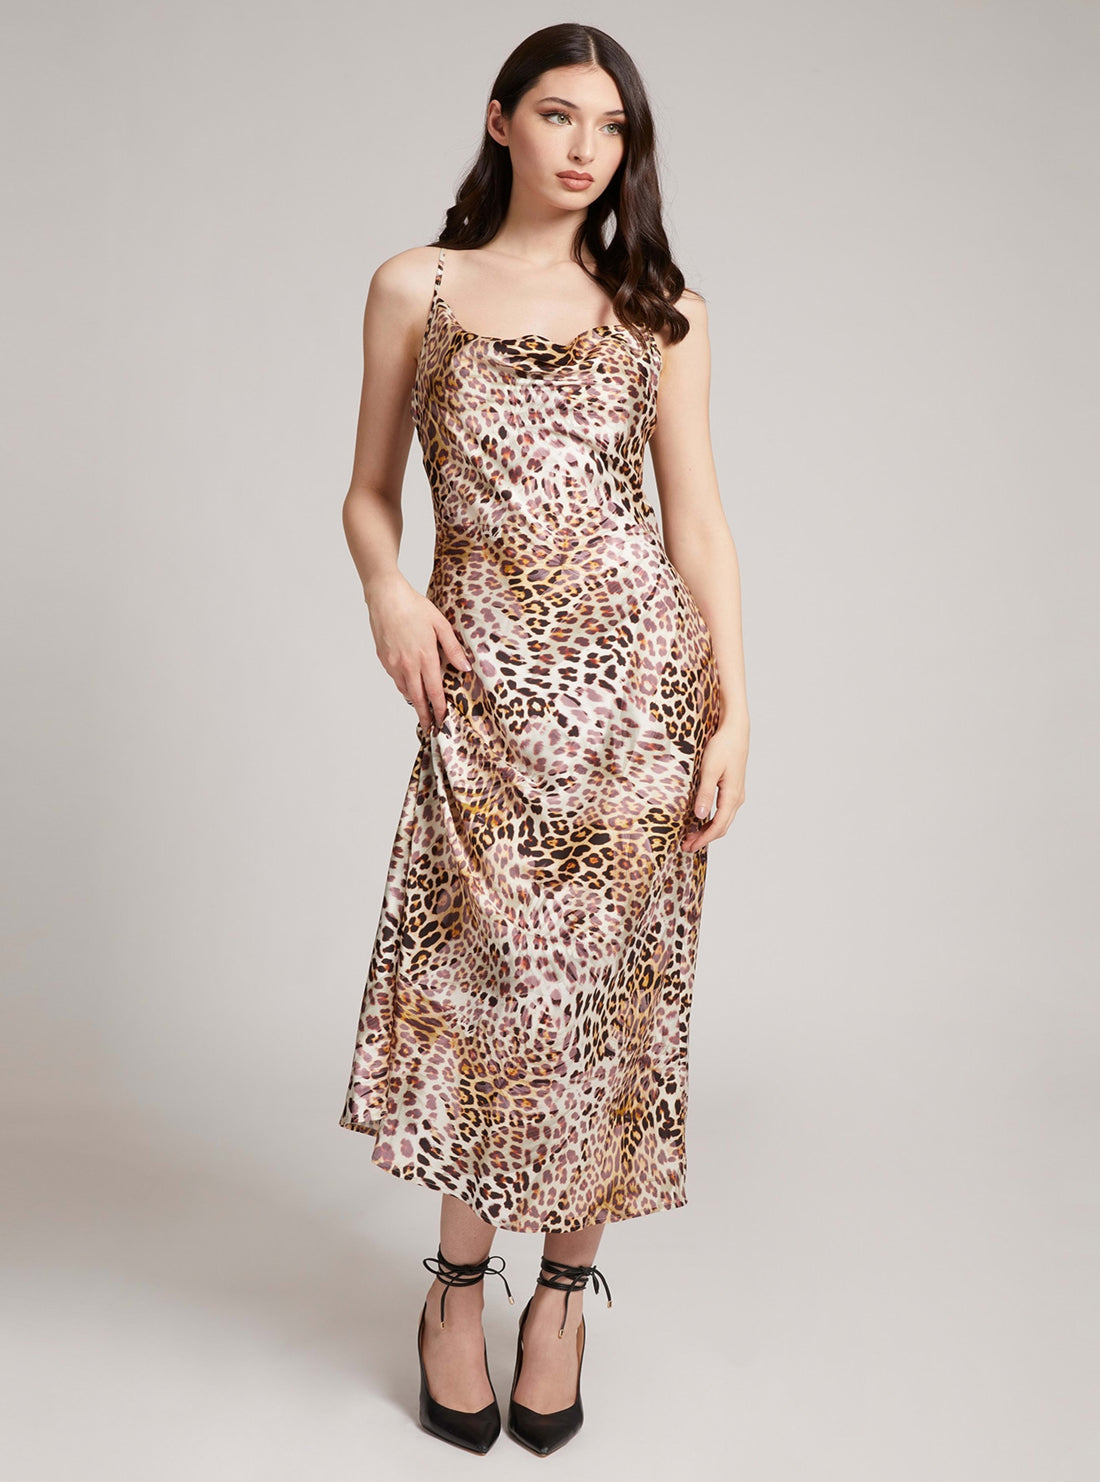 GUESS Womens Eco Leopard Print New Akilina Maxi Dress W1YK1CWD8G2 Front View